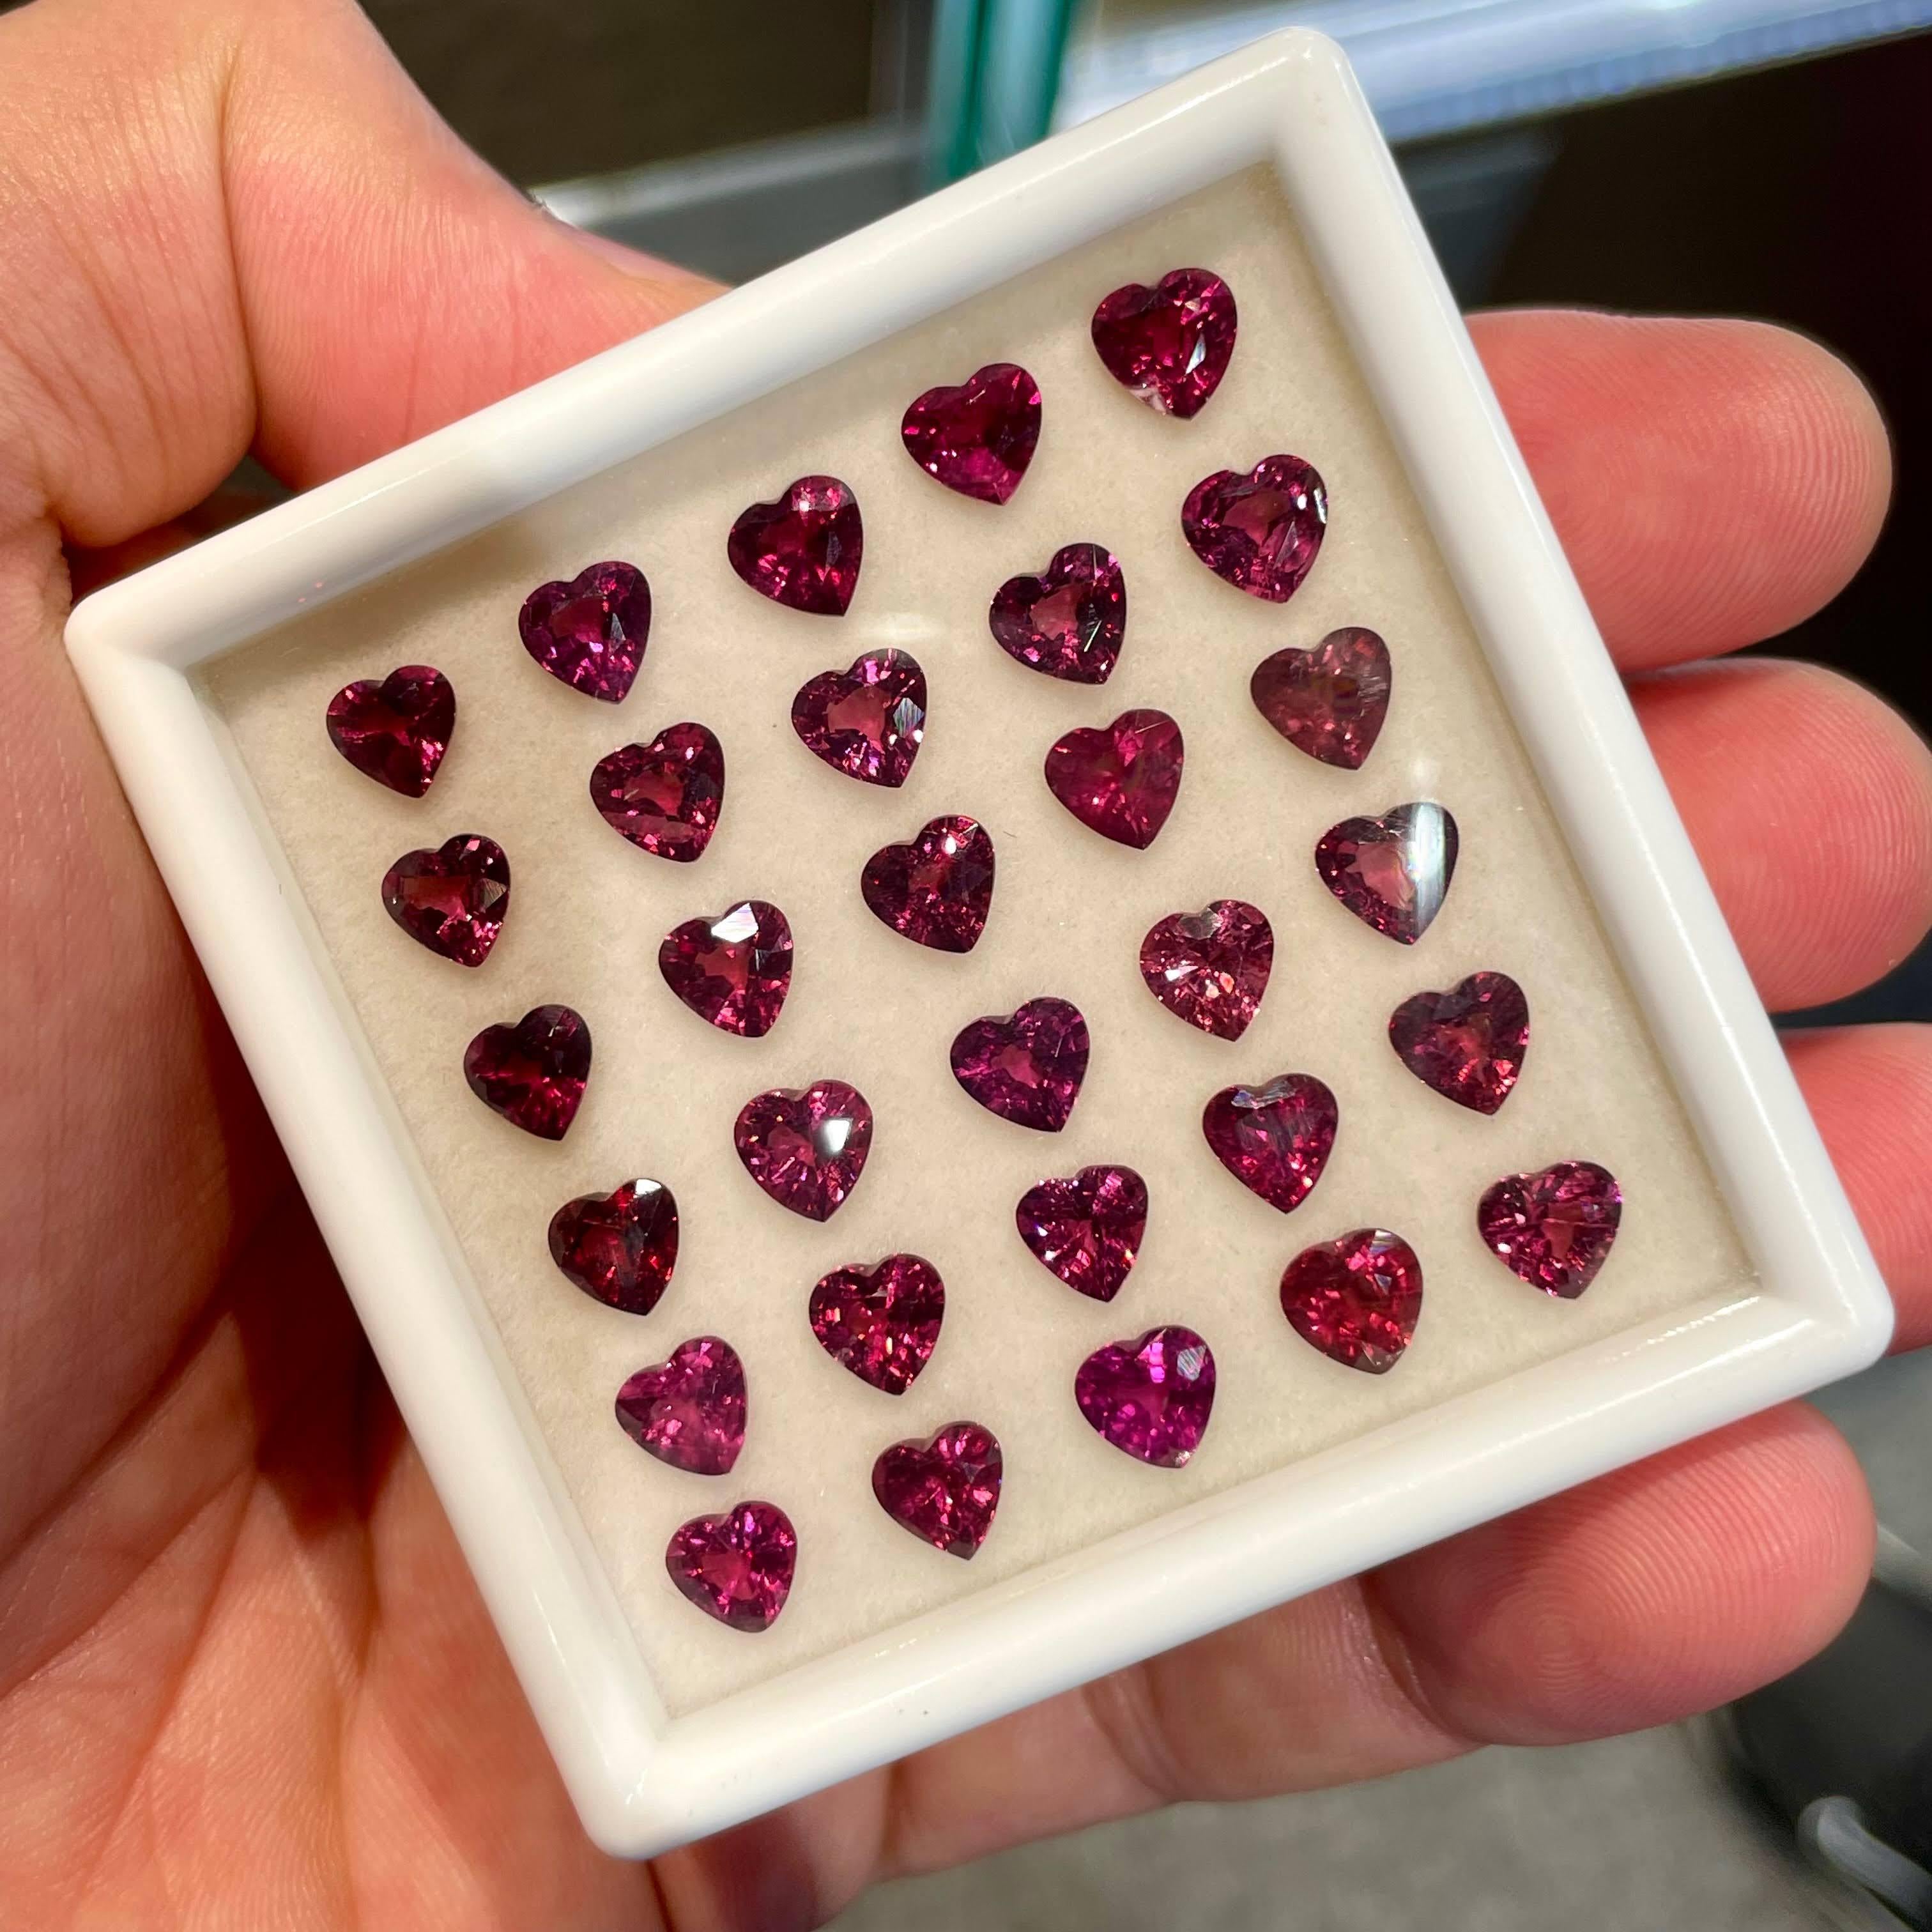 Weight 26.60 carats
Dim 6.1x5.8x3.7 mm
Treatment None
Clarity Clean
Origin Madagascar
Shape heart
Cut heart step cut





The 14.07 carats Heart Shaped Red Garnet is a mesmerizing natural Tanzanian gemstone that captivates with its deep, rich red